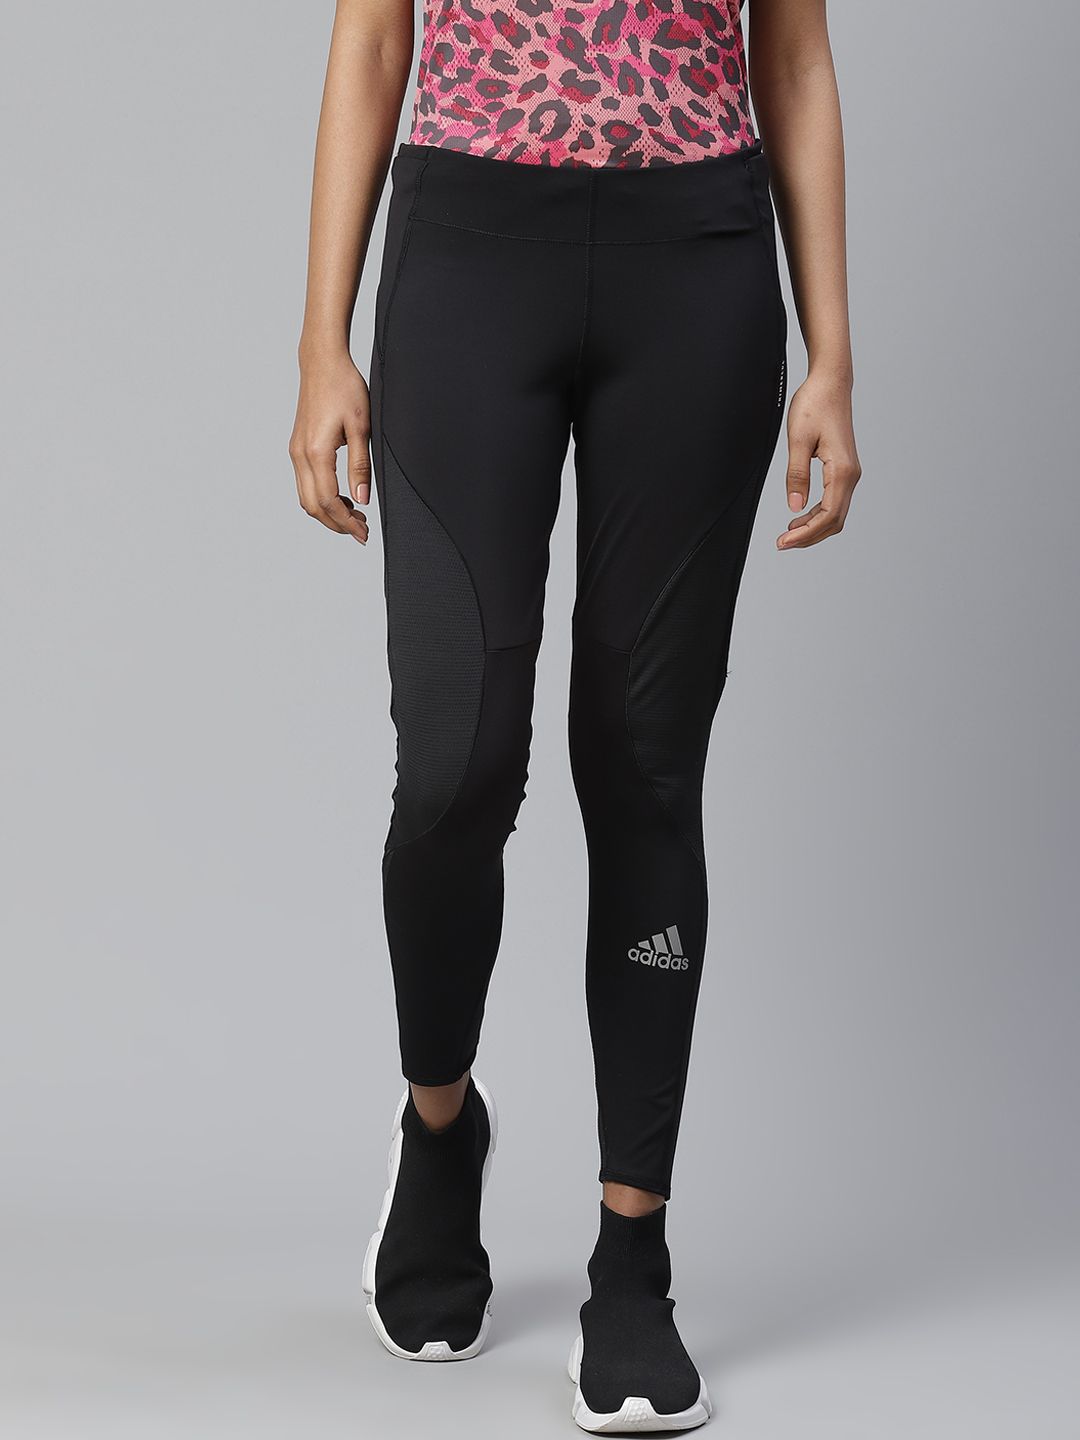 ADIDAS Women Black Solid Fast Running Primeblue Sustainable Tights Price in India